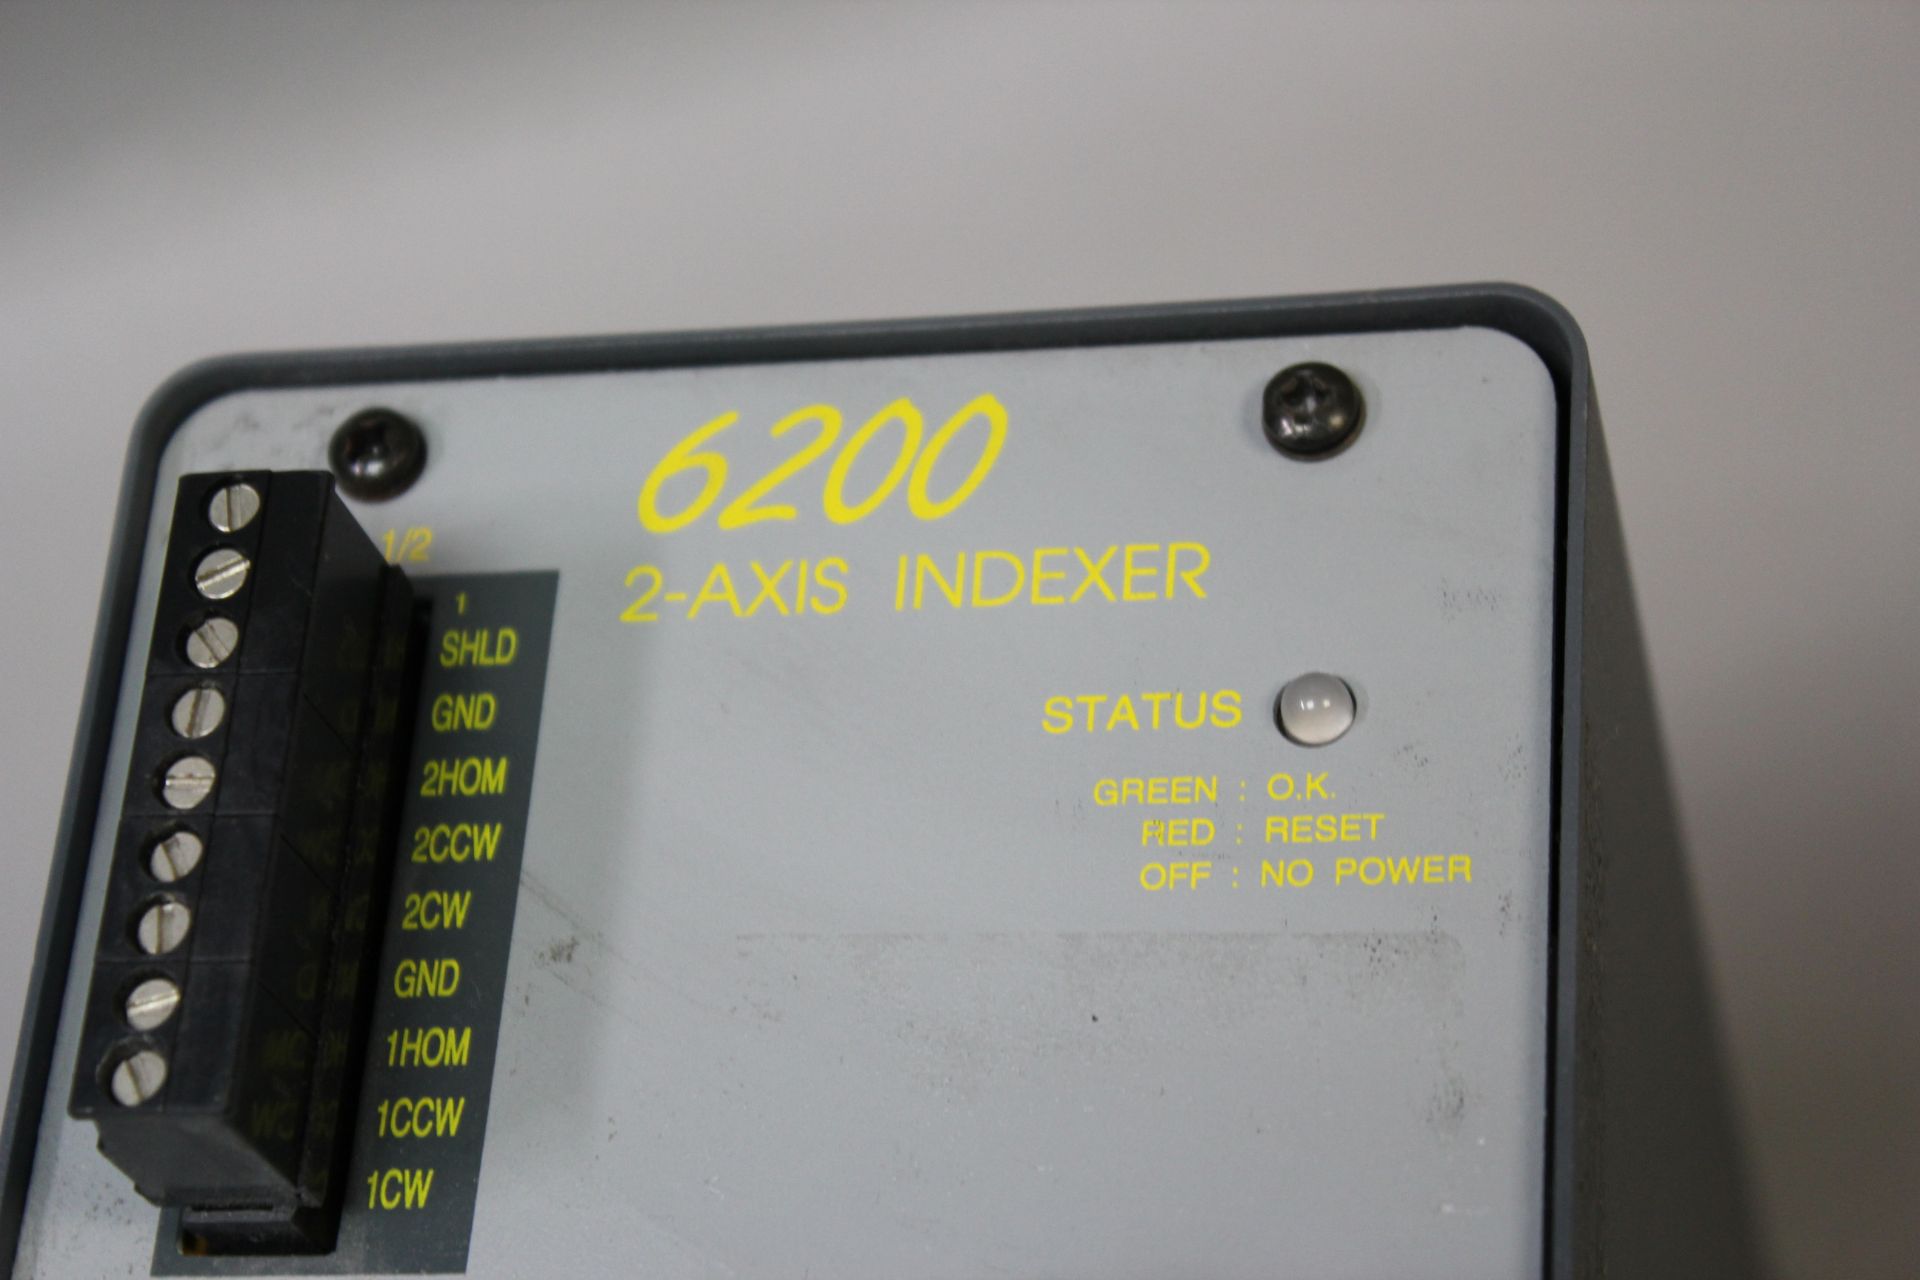 PARKER COMPUMOTOR 6200 2 AXIS INDEXER - Image 2 of 4